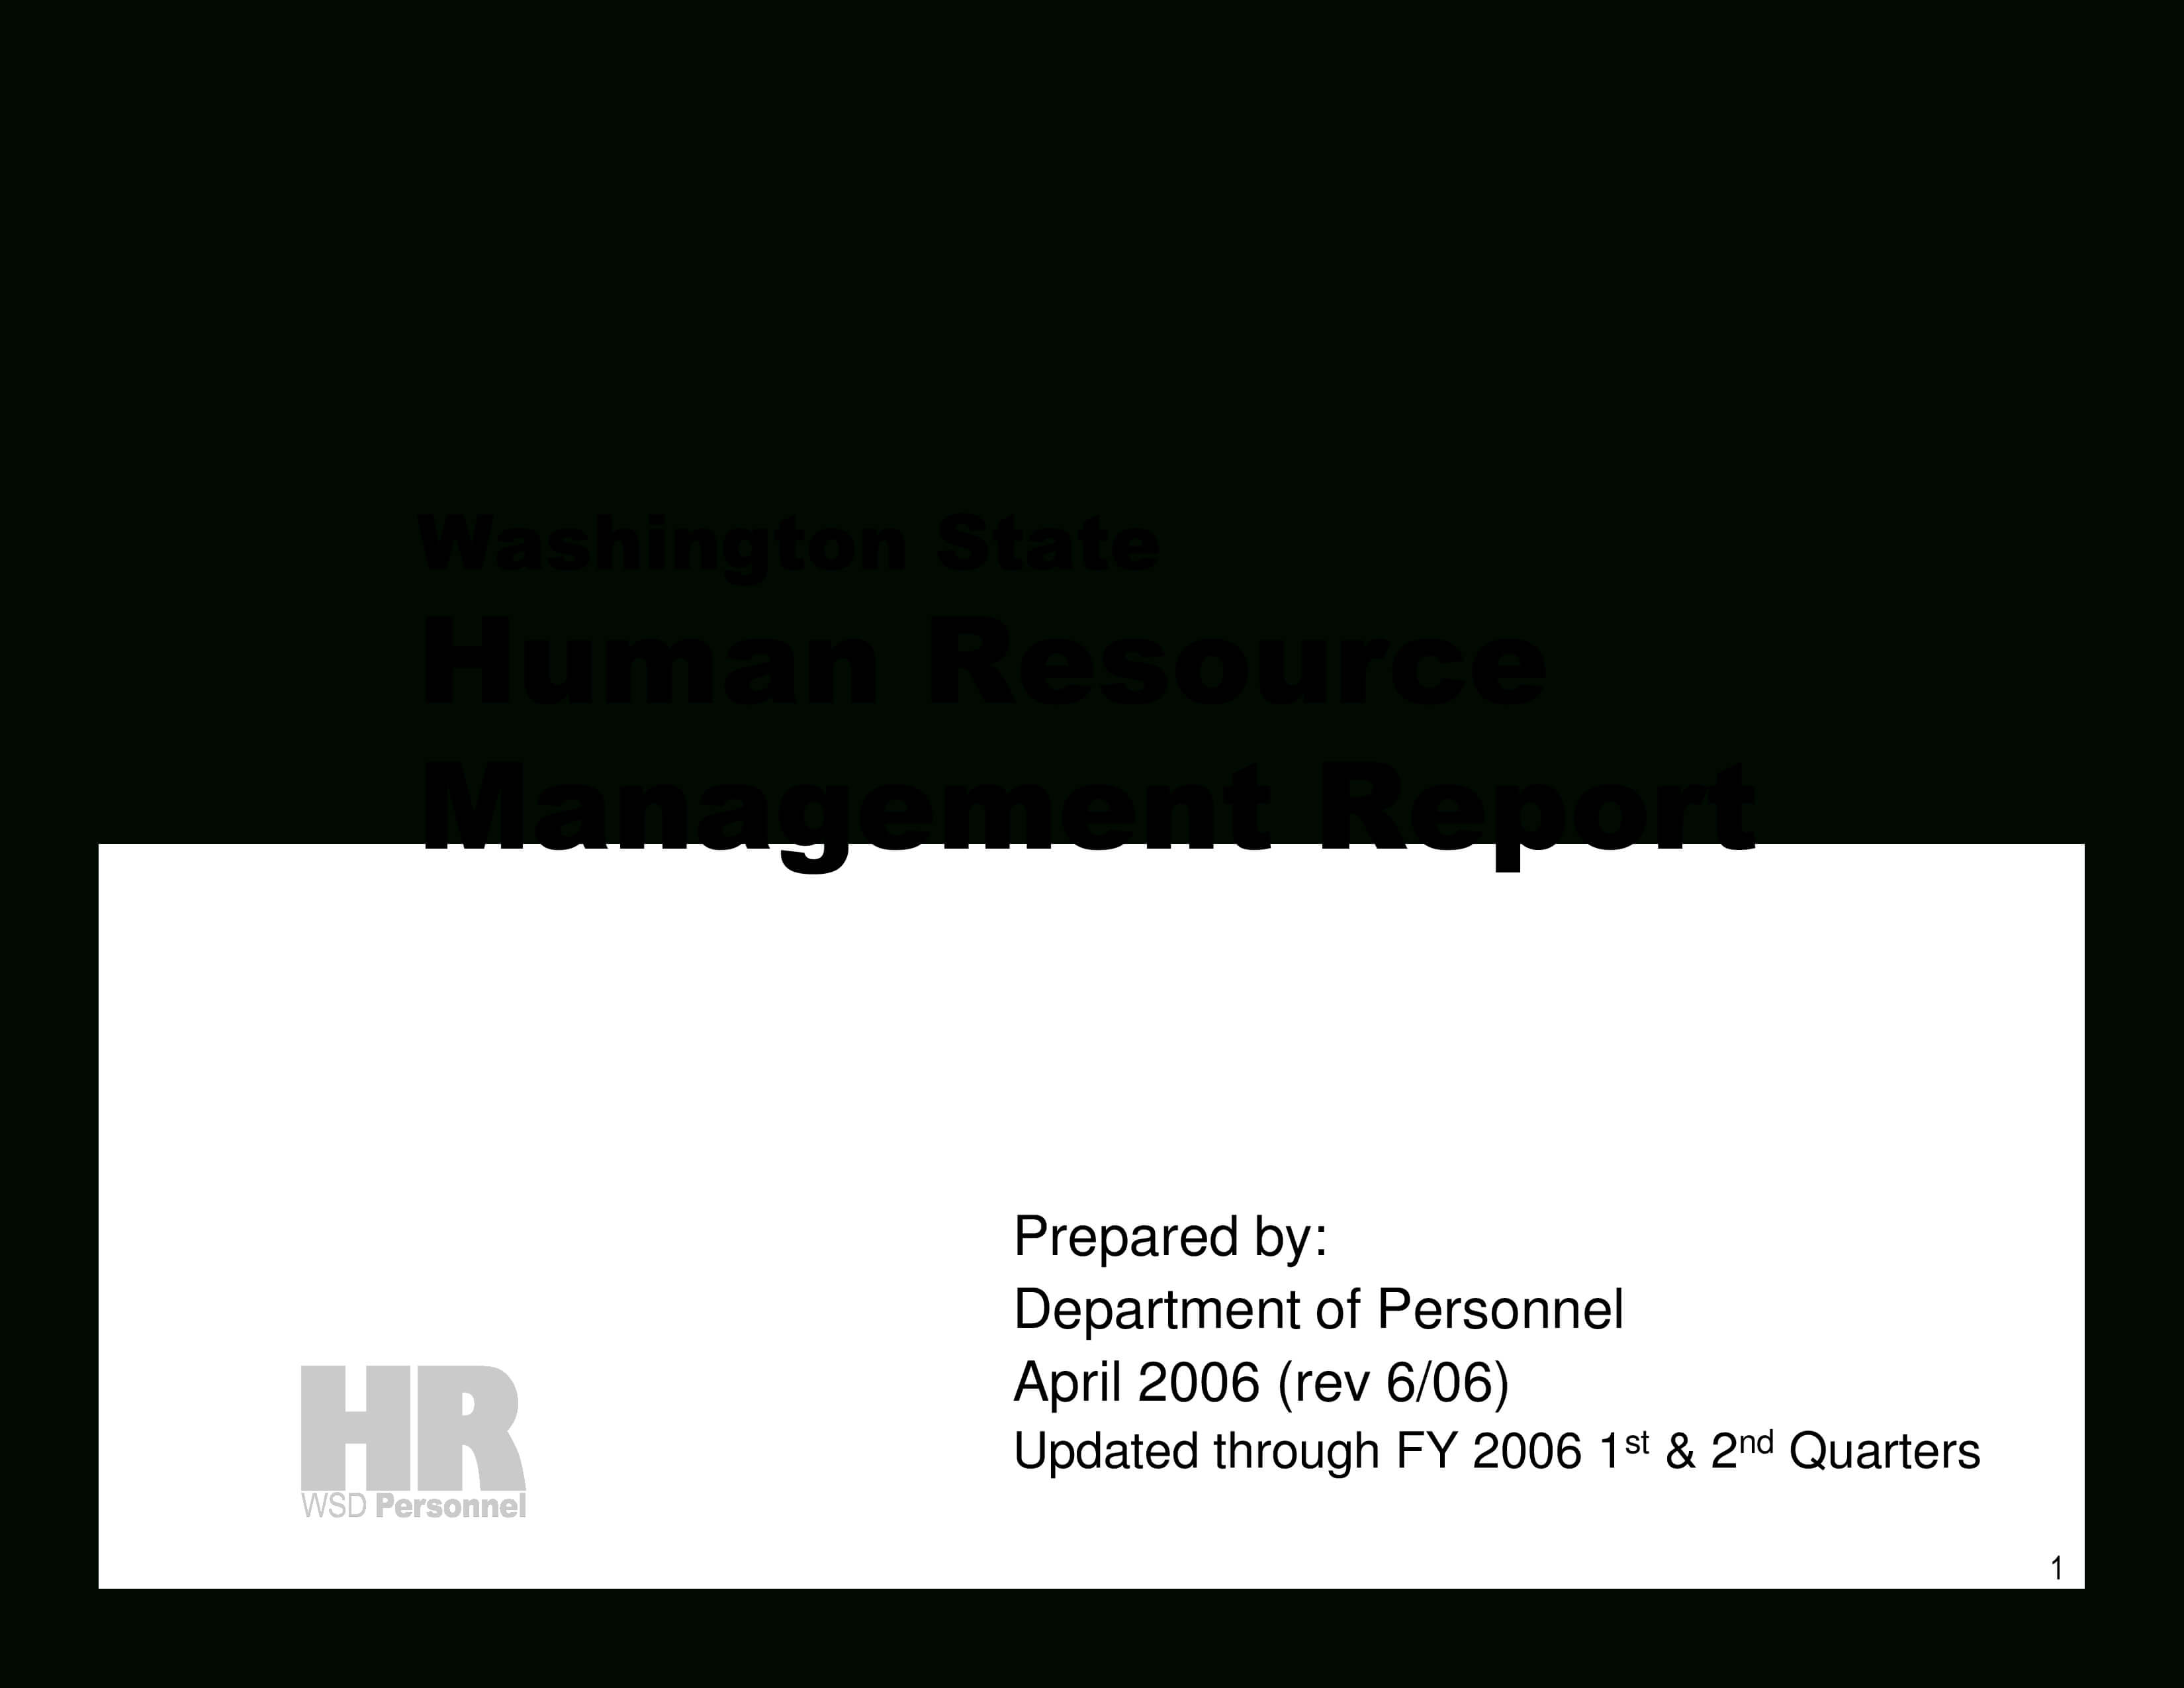 Hr Management Report | Templates At Allbusinesstemplates Pertaining To Hr Management Report Template